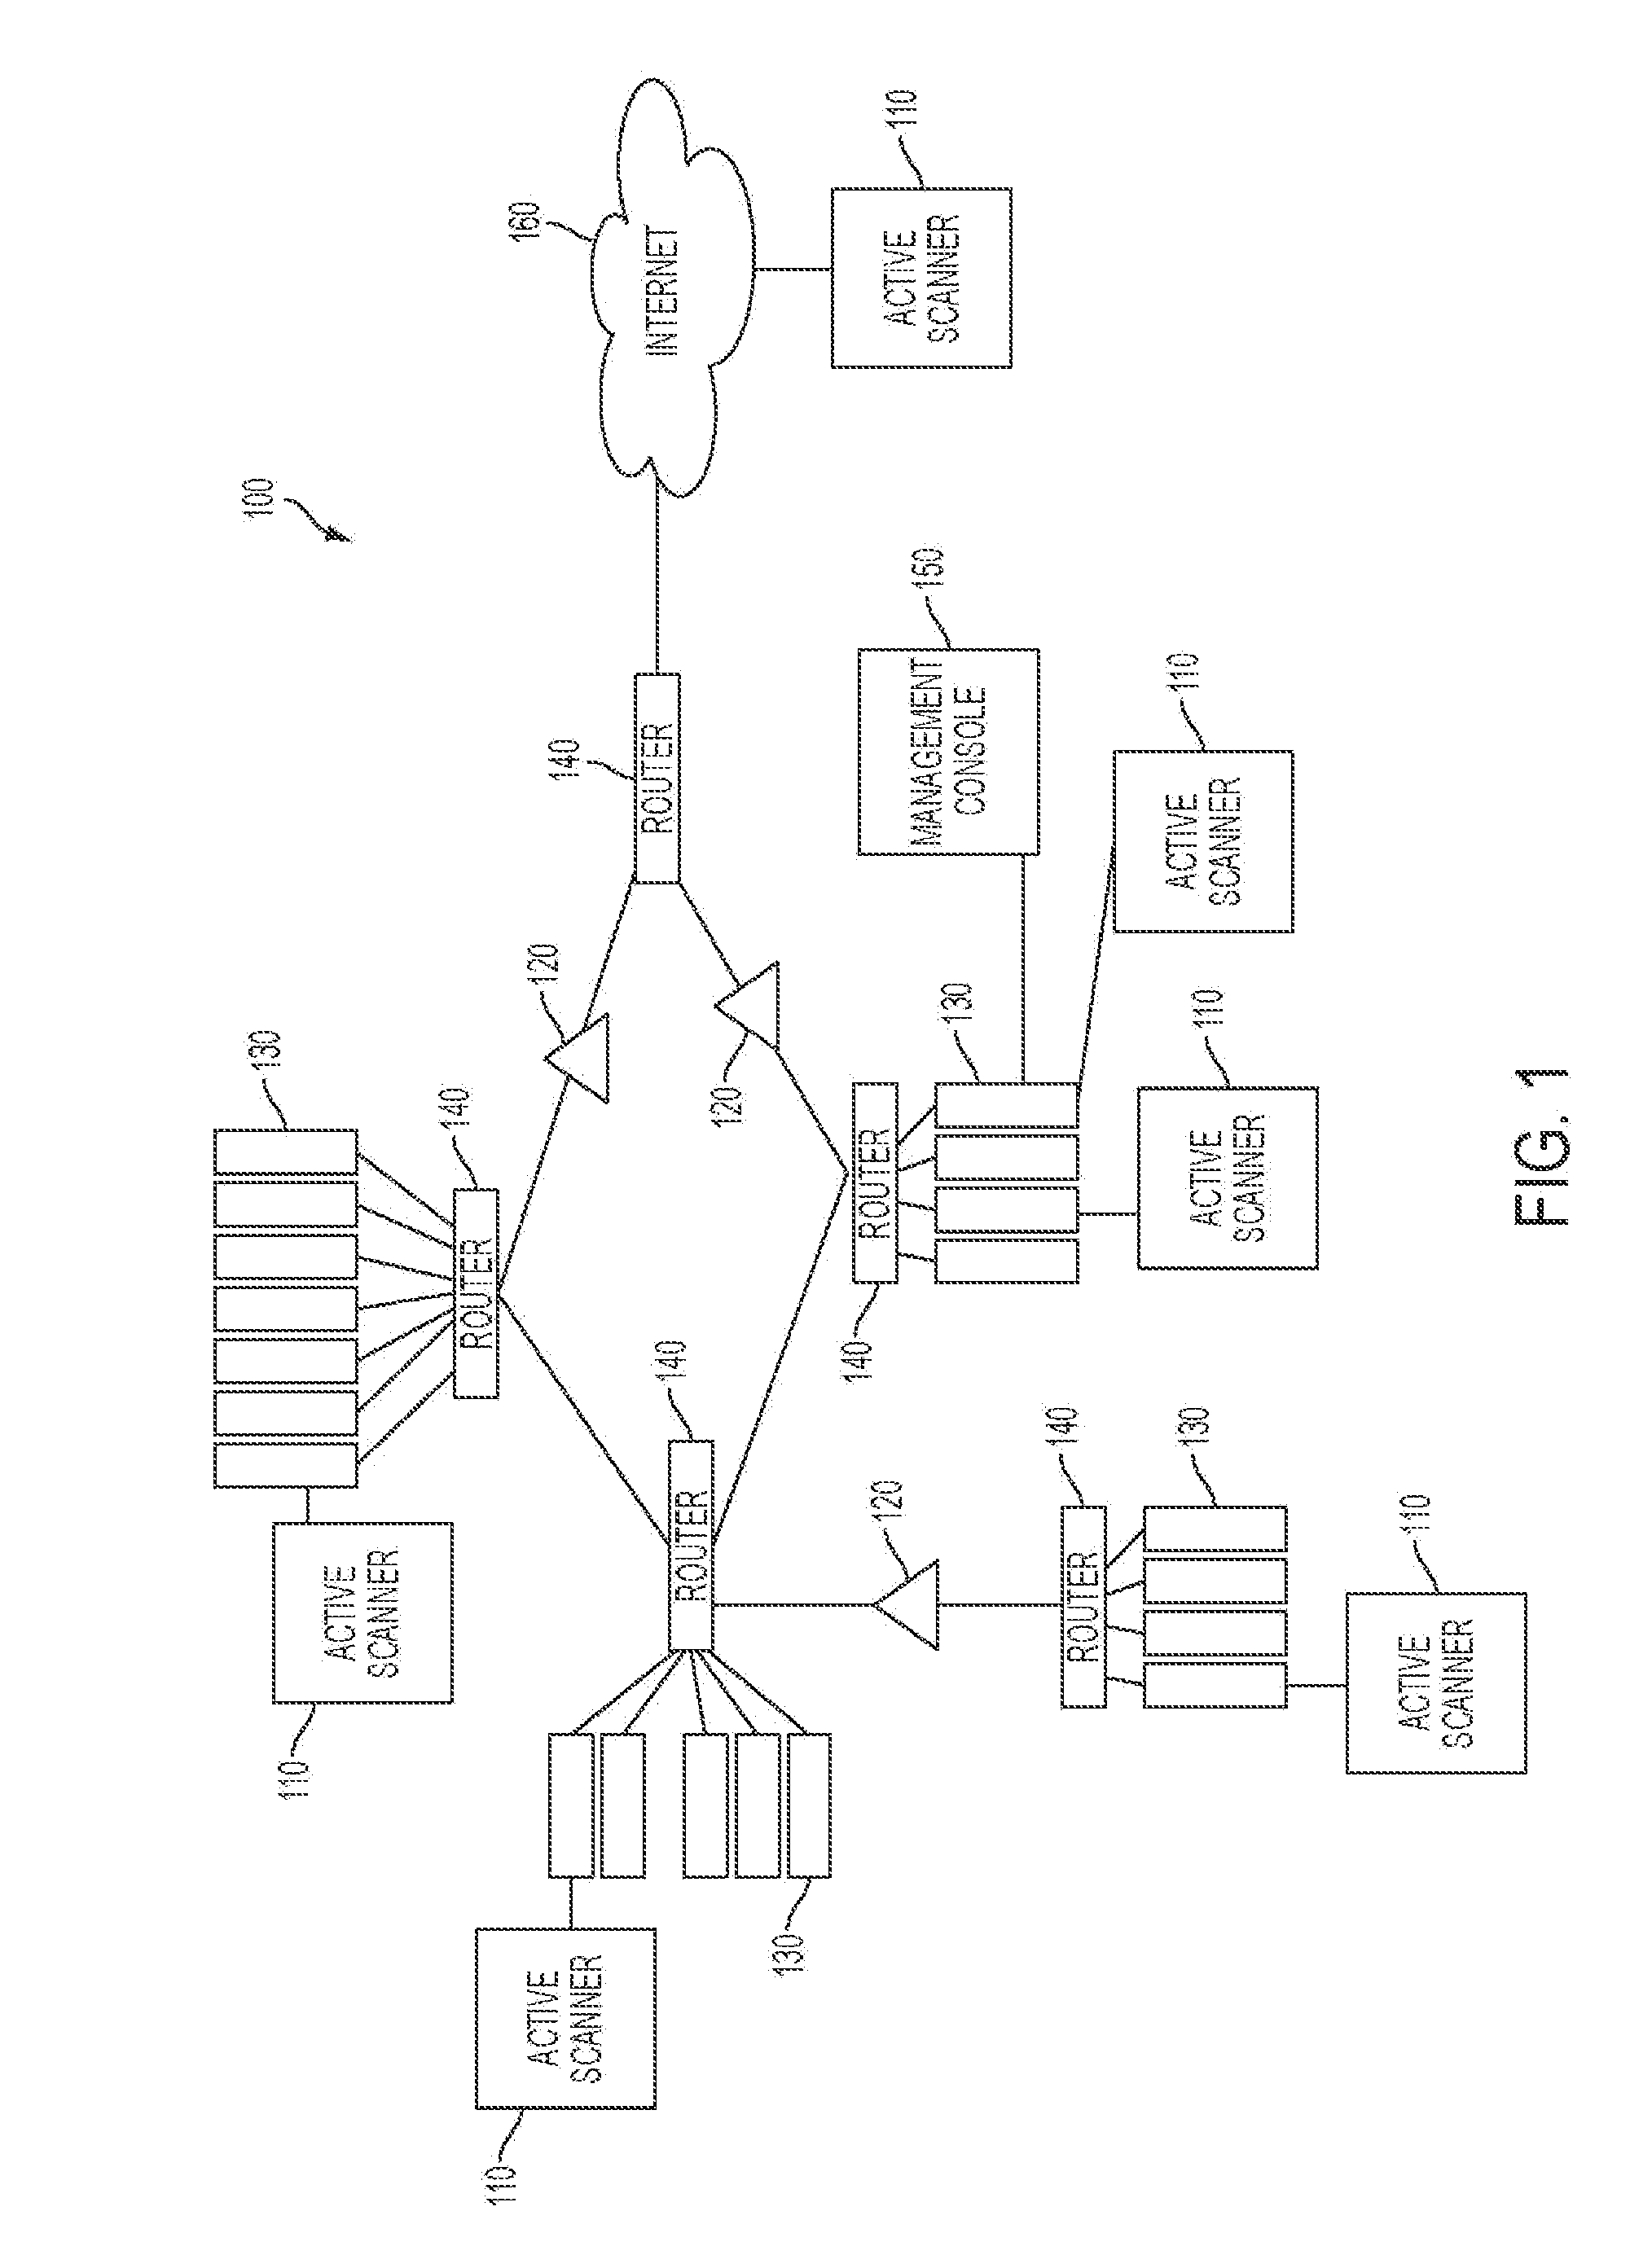 System and method for identifying exploitable weak points in a network